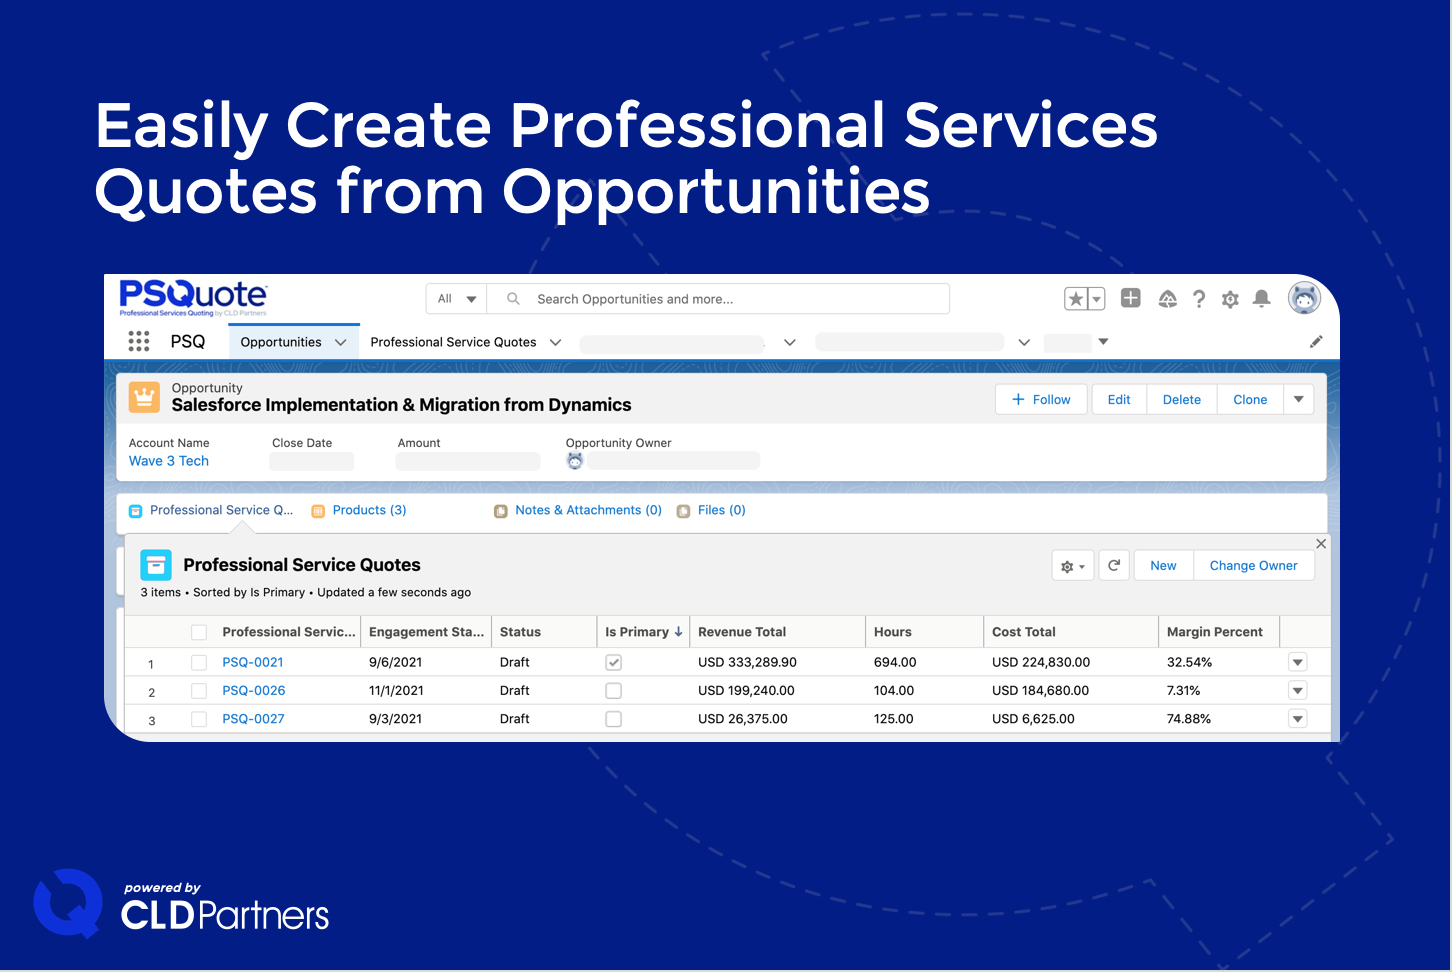 Sales and Delivery Teams create professional services quotes directly in Salesforce